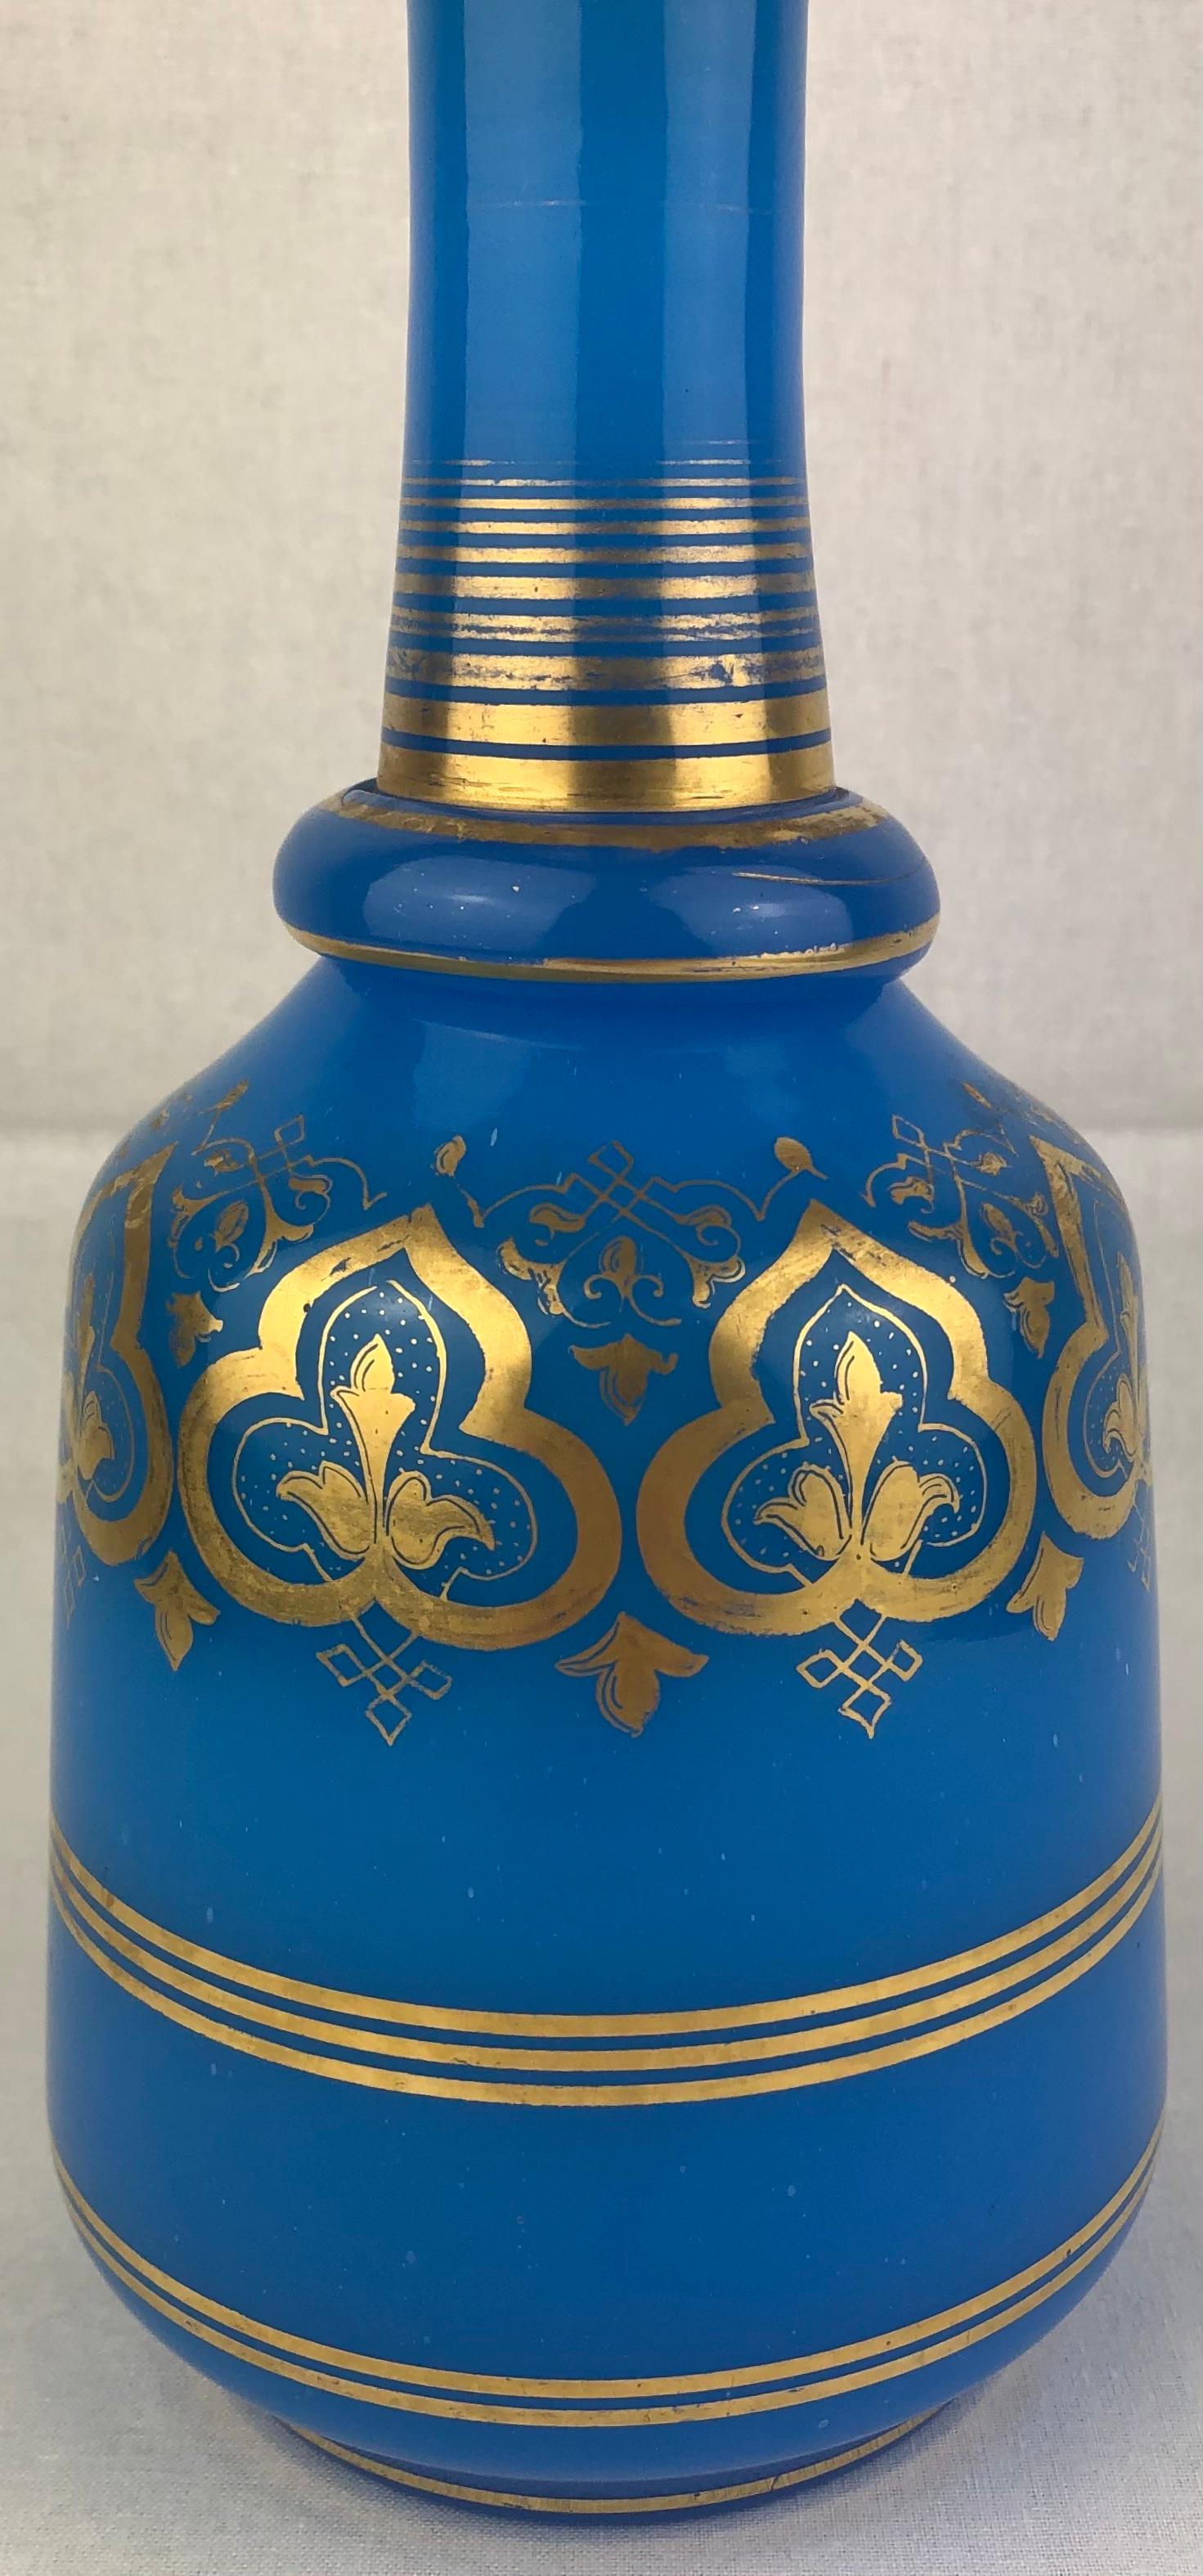 A large stunning French blue opaline glass bubble bath bottle dating from the 19th century. 
Unsigned Baccarat piece. 

Very attractive with vibrant colors. Overall good condition with some minor fading from use. 
The bouchon or top had a crack